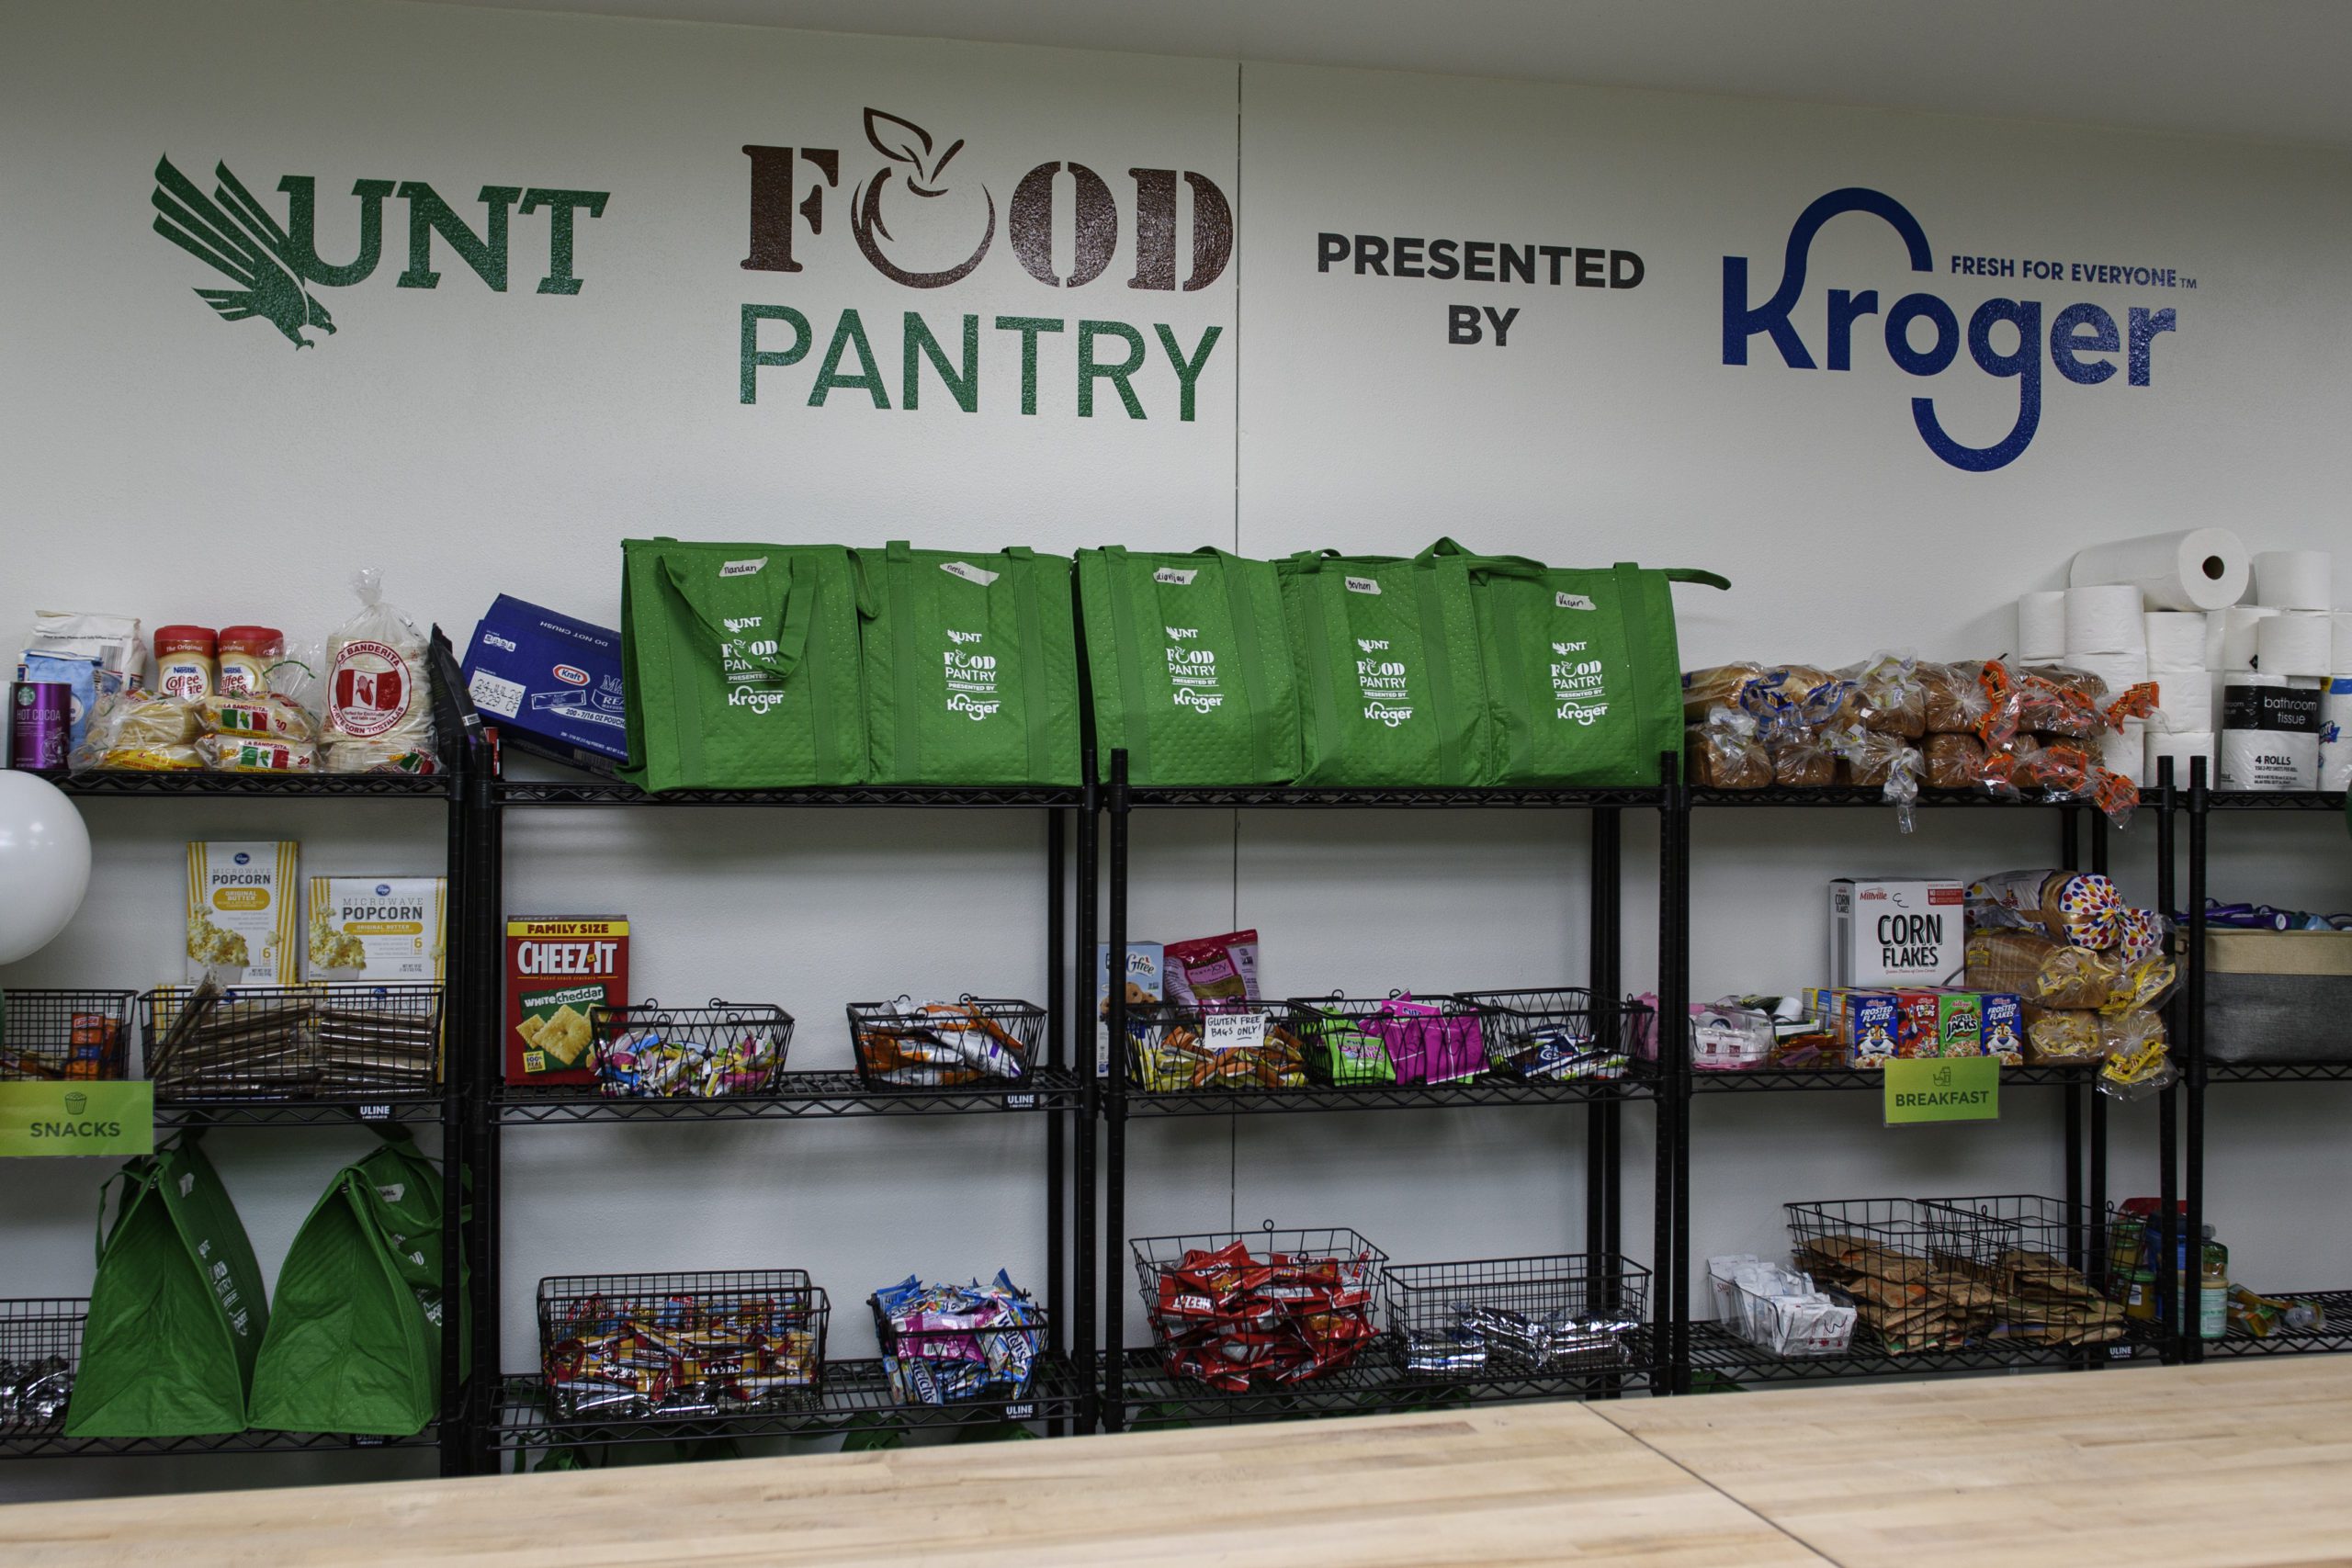 event to announce that Kroger will sponsor the UNT Food Pantry